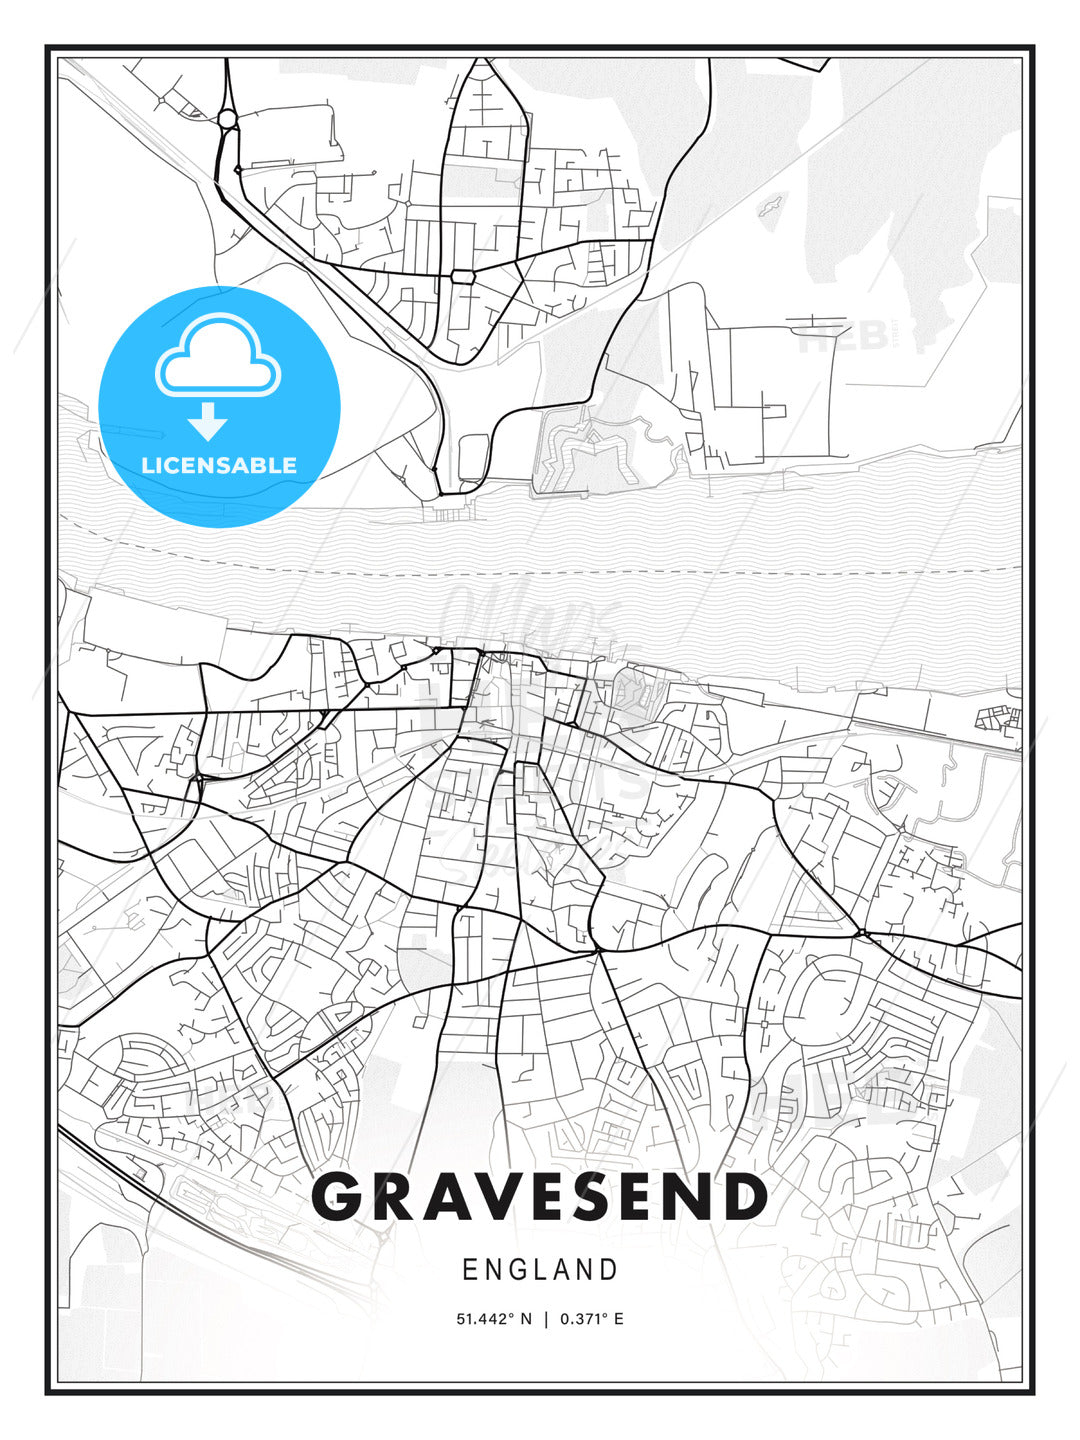 Gravesend, England, Modern Print Template in Various Formats - HEBSTREITS Sketches